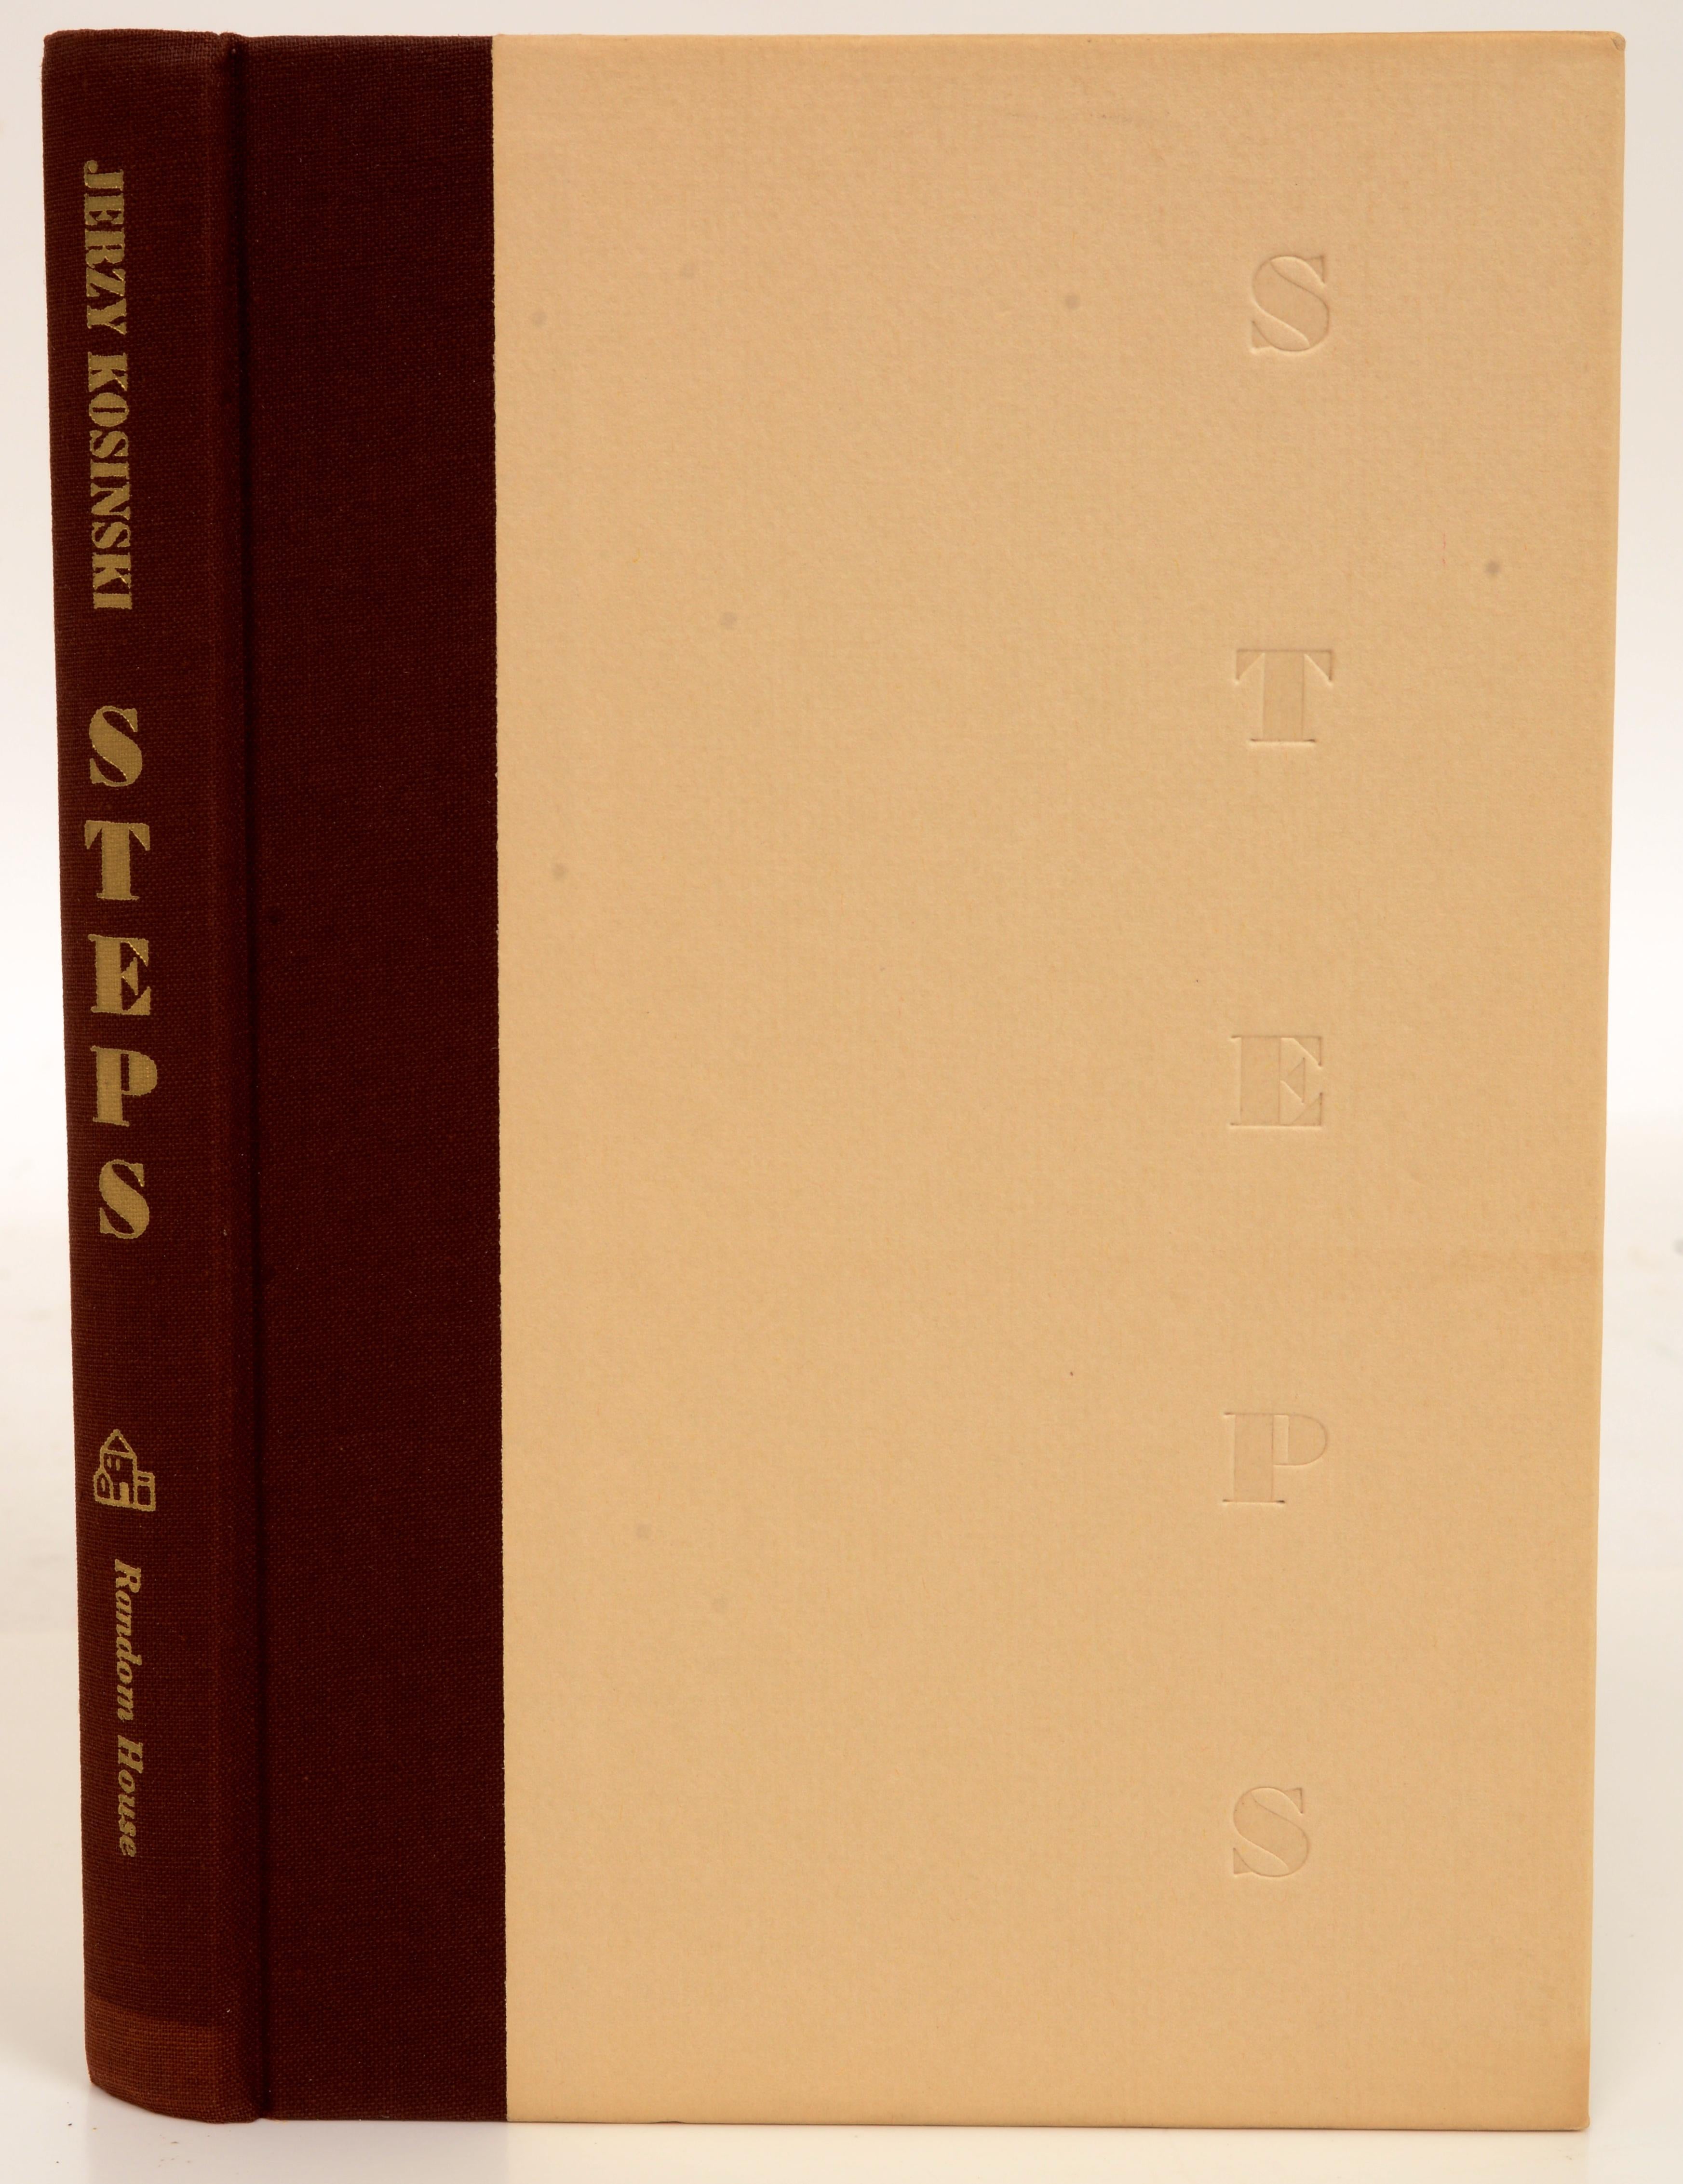 Steps, Jerzy Kosinski. Published by Random House, New York, 1968. Stated 1st Printing hardcover with dust jacket. Steps is a book by the Polish-American writer Jerzy Kosinski, released in 1968 by Random House. The work is comprised of scores of